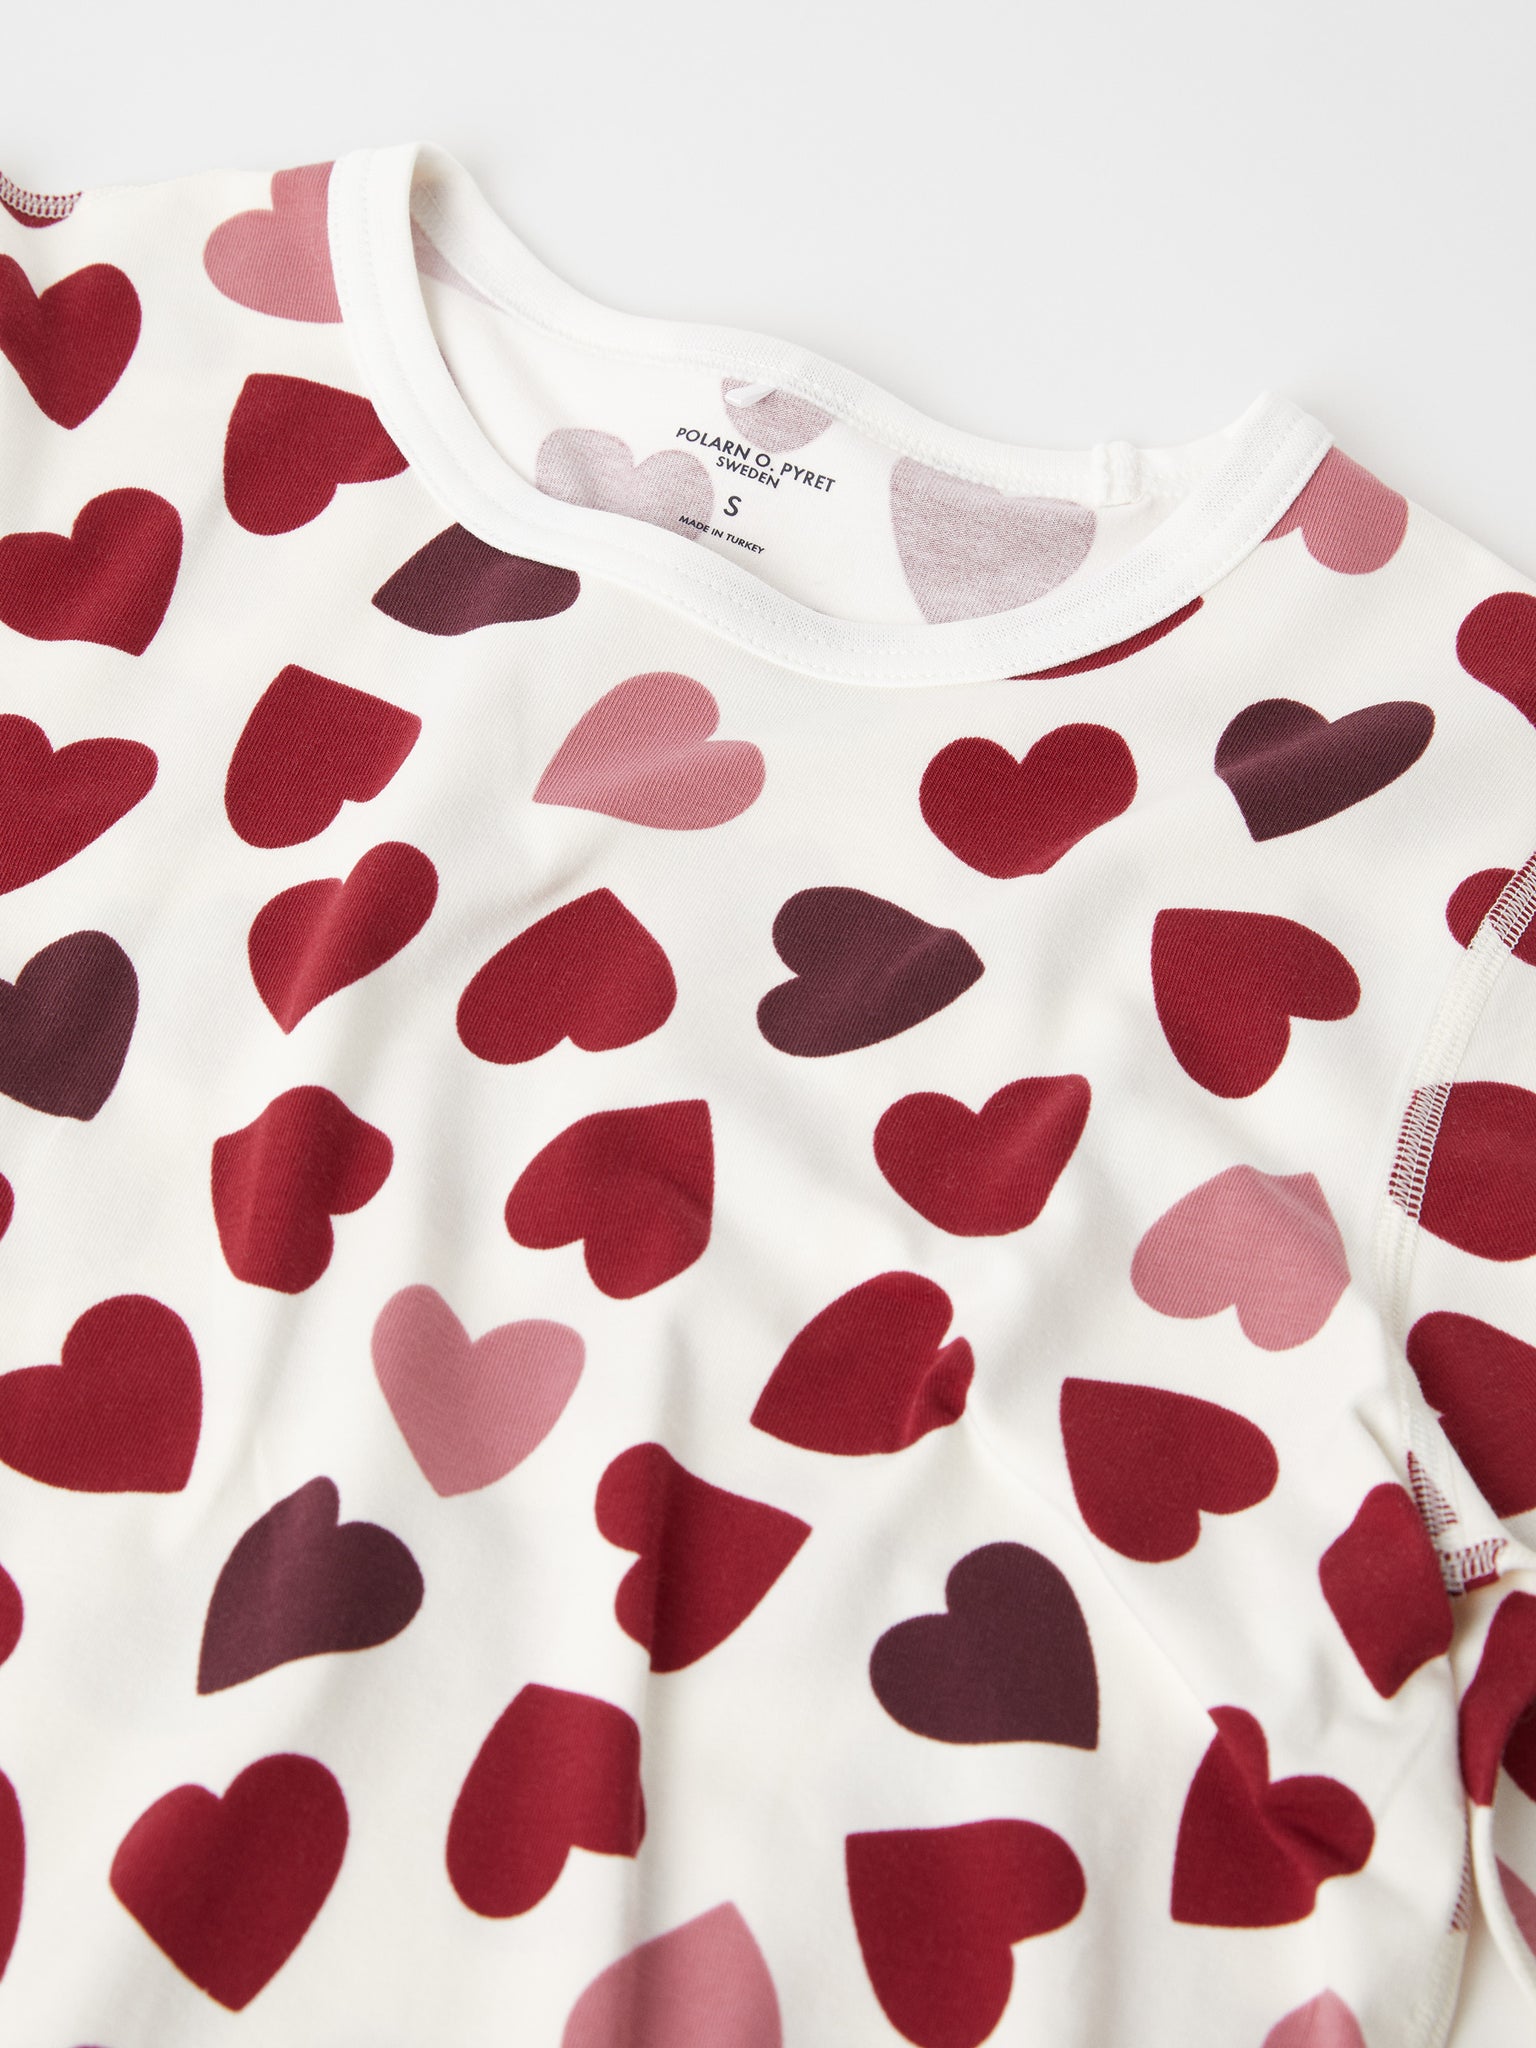 Heart Print Adult Pyjamas from the Polarn O. Pyret adult collection. Clothes made using sustainably sourced materials.